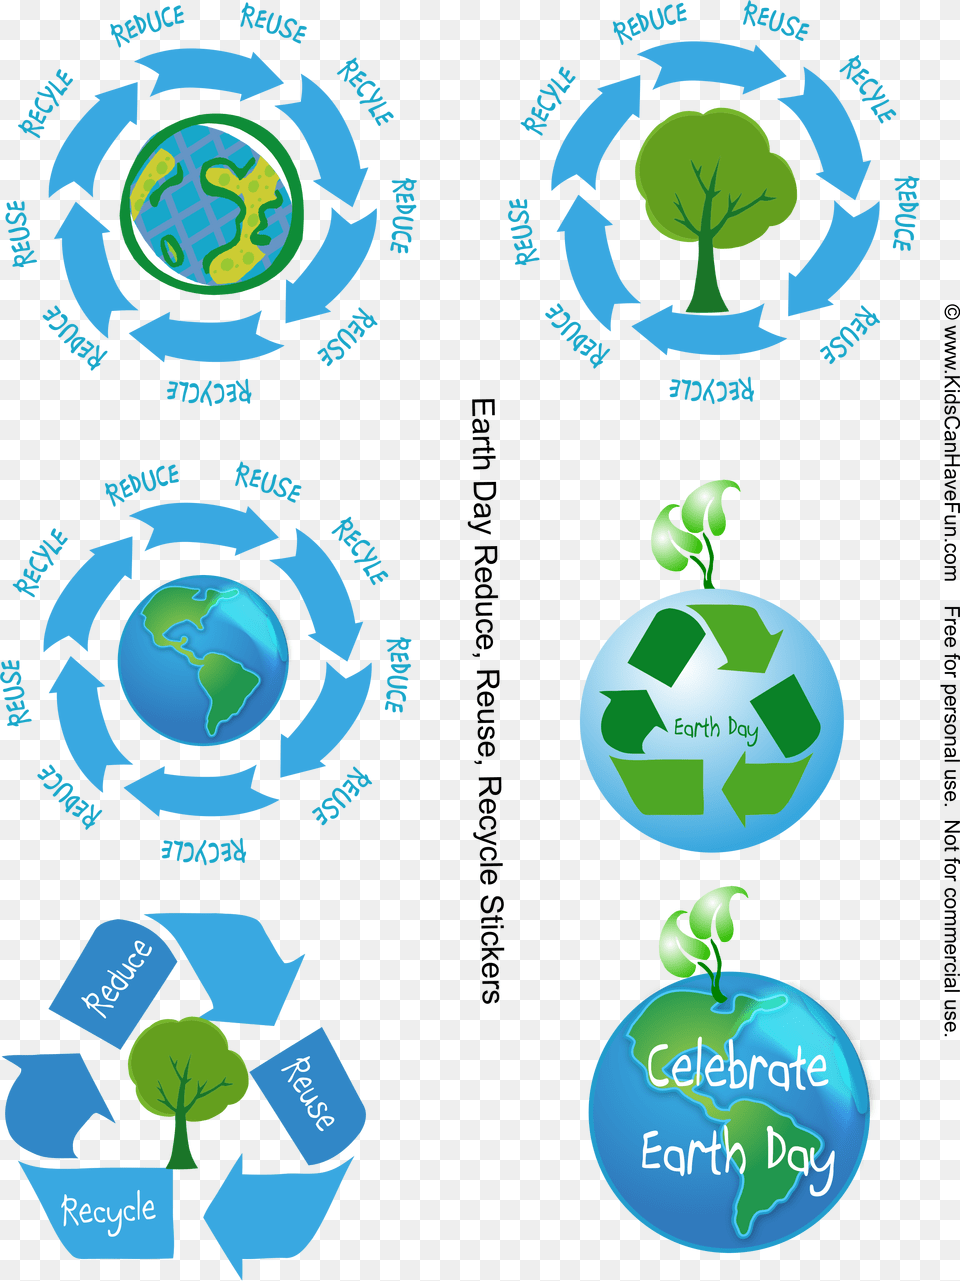 Transparent Reduce Reuse Recycle Reduce Reuse Recycle In Earth, Recycling Symbol, Symbol Png